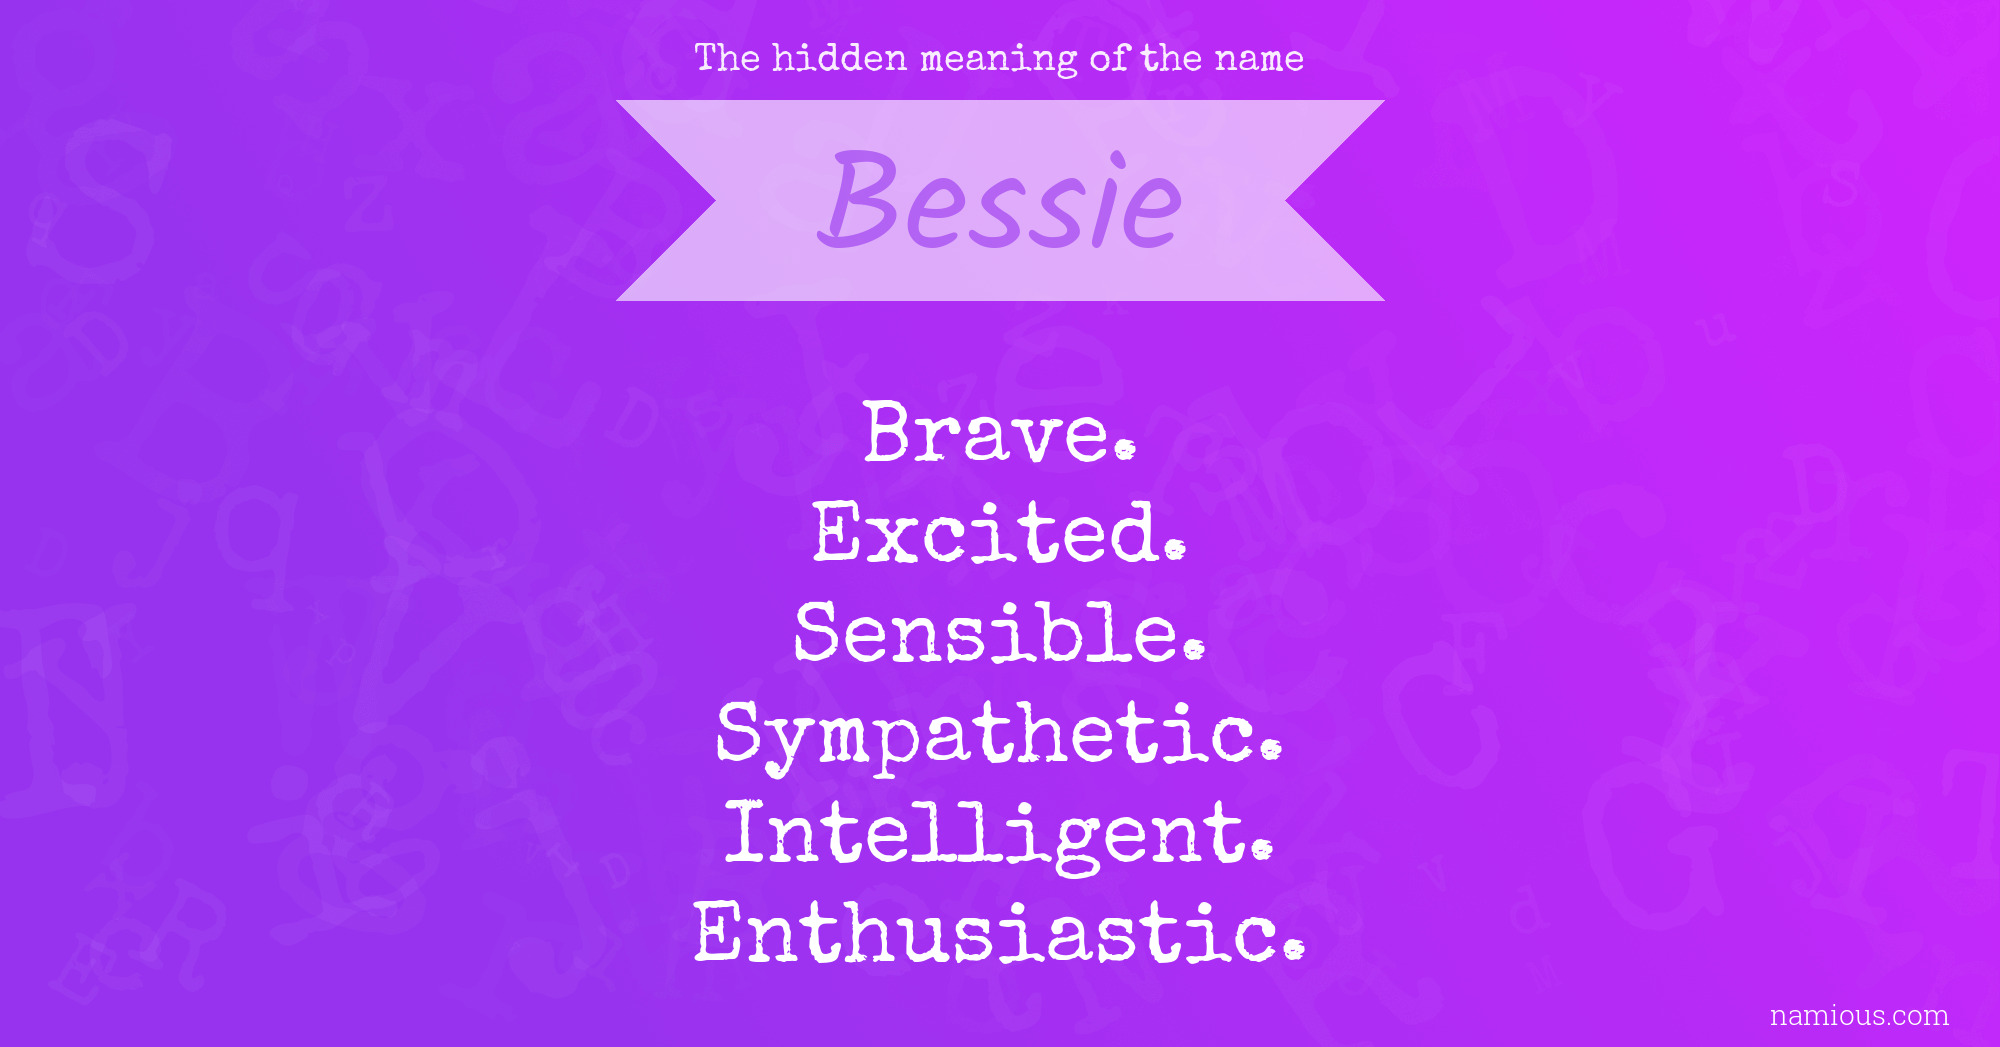 The hidden meaning of the name Bessie